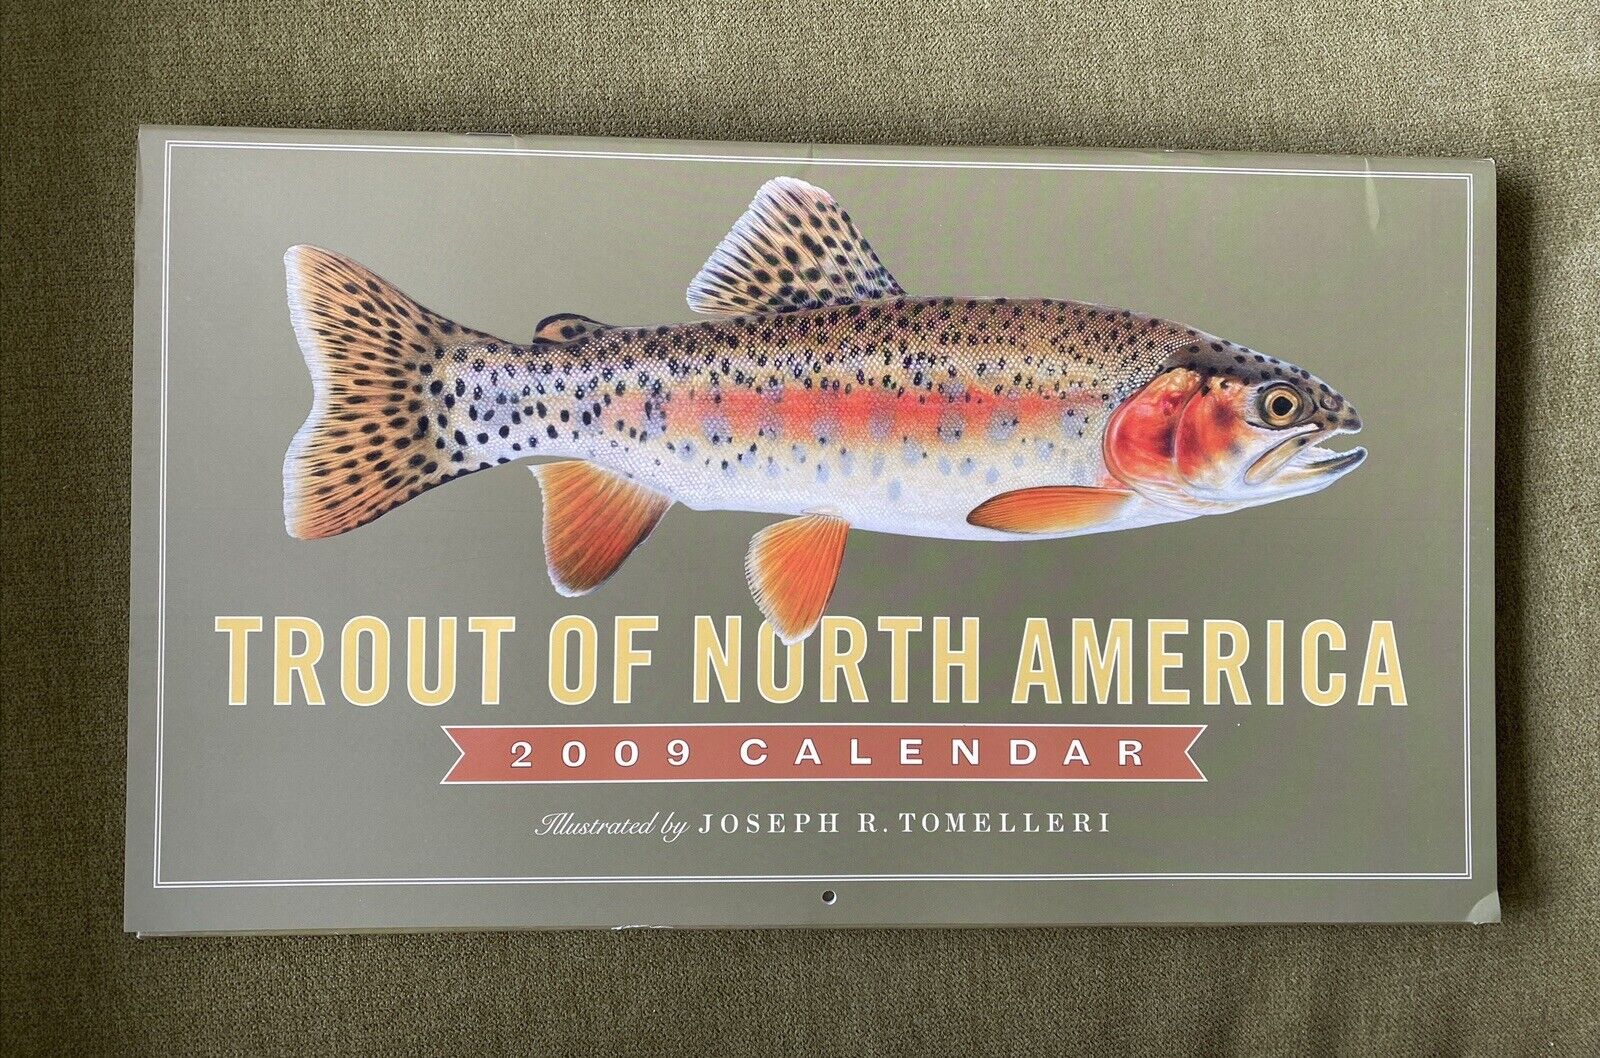 2009 Trout of North America Calendar Excellent Condition Fishing Trout Vintage